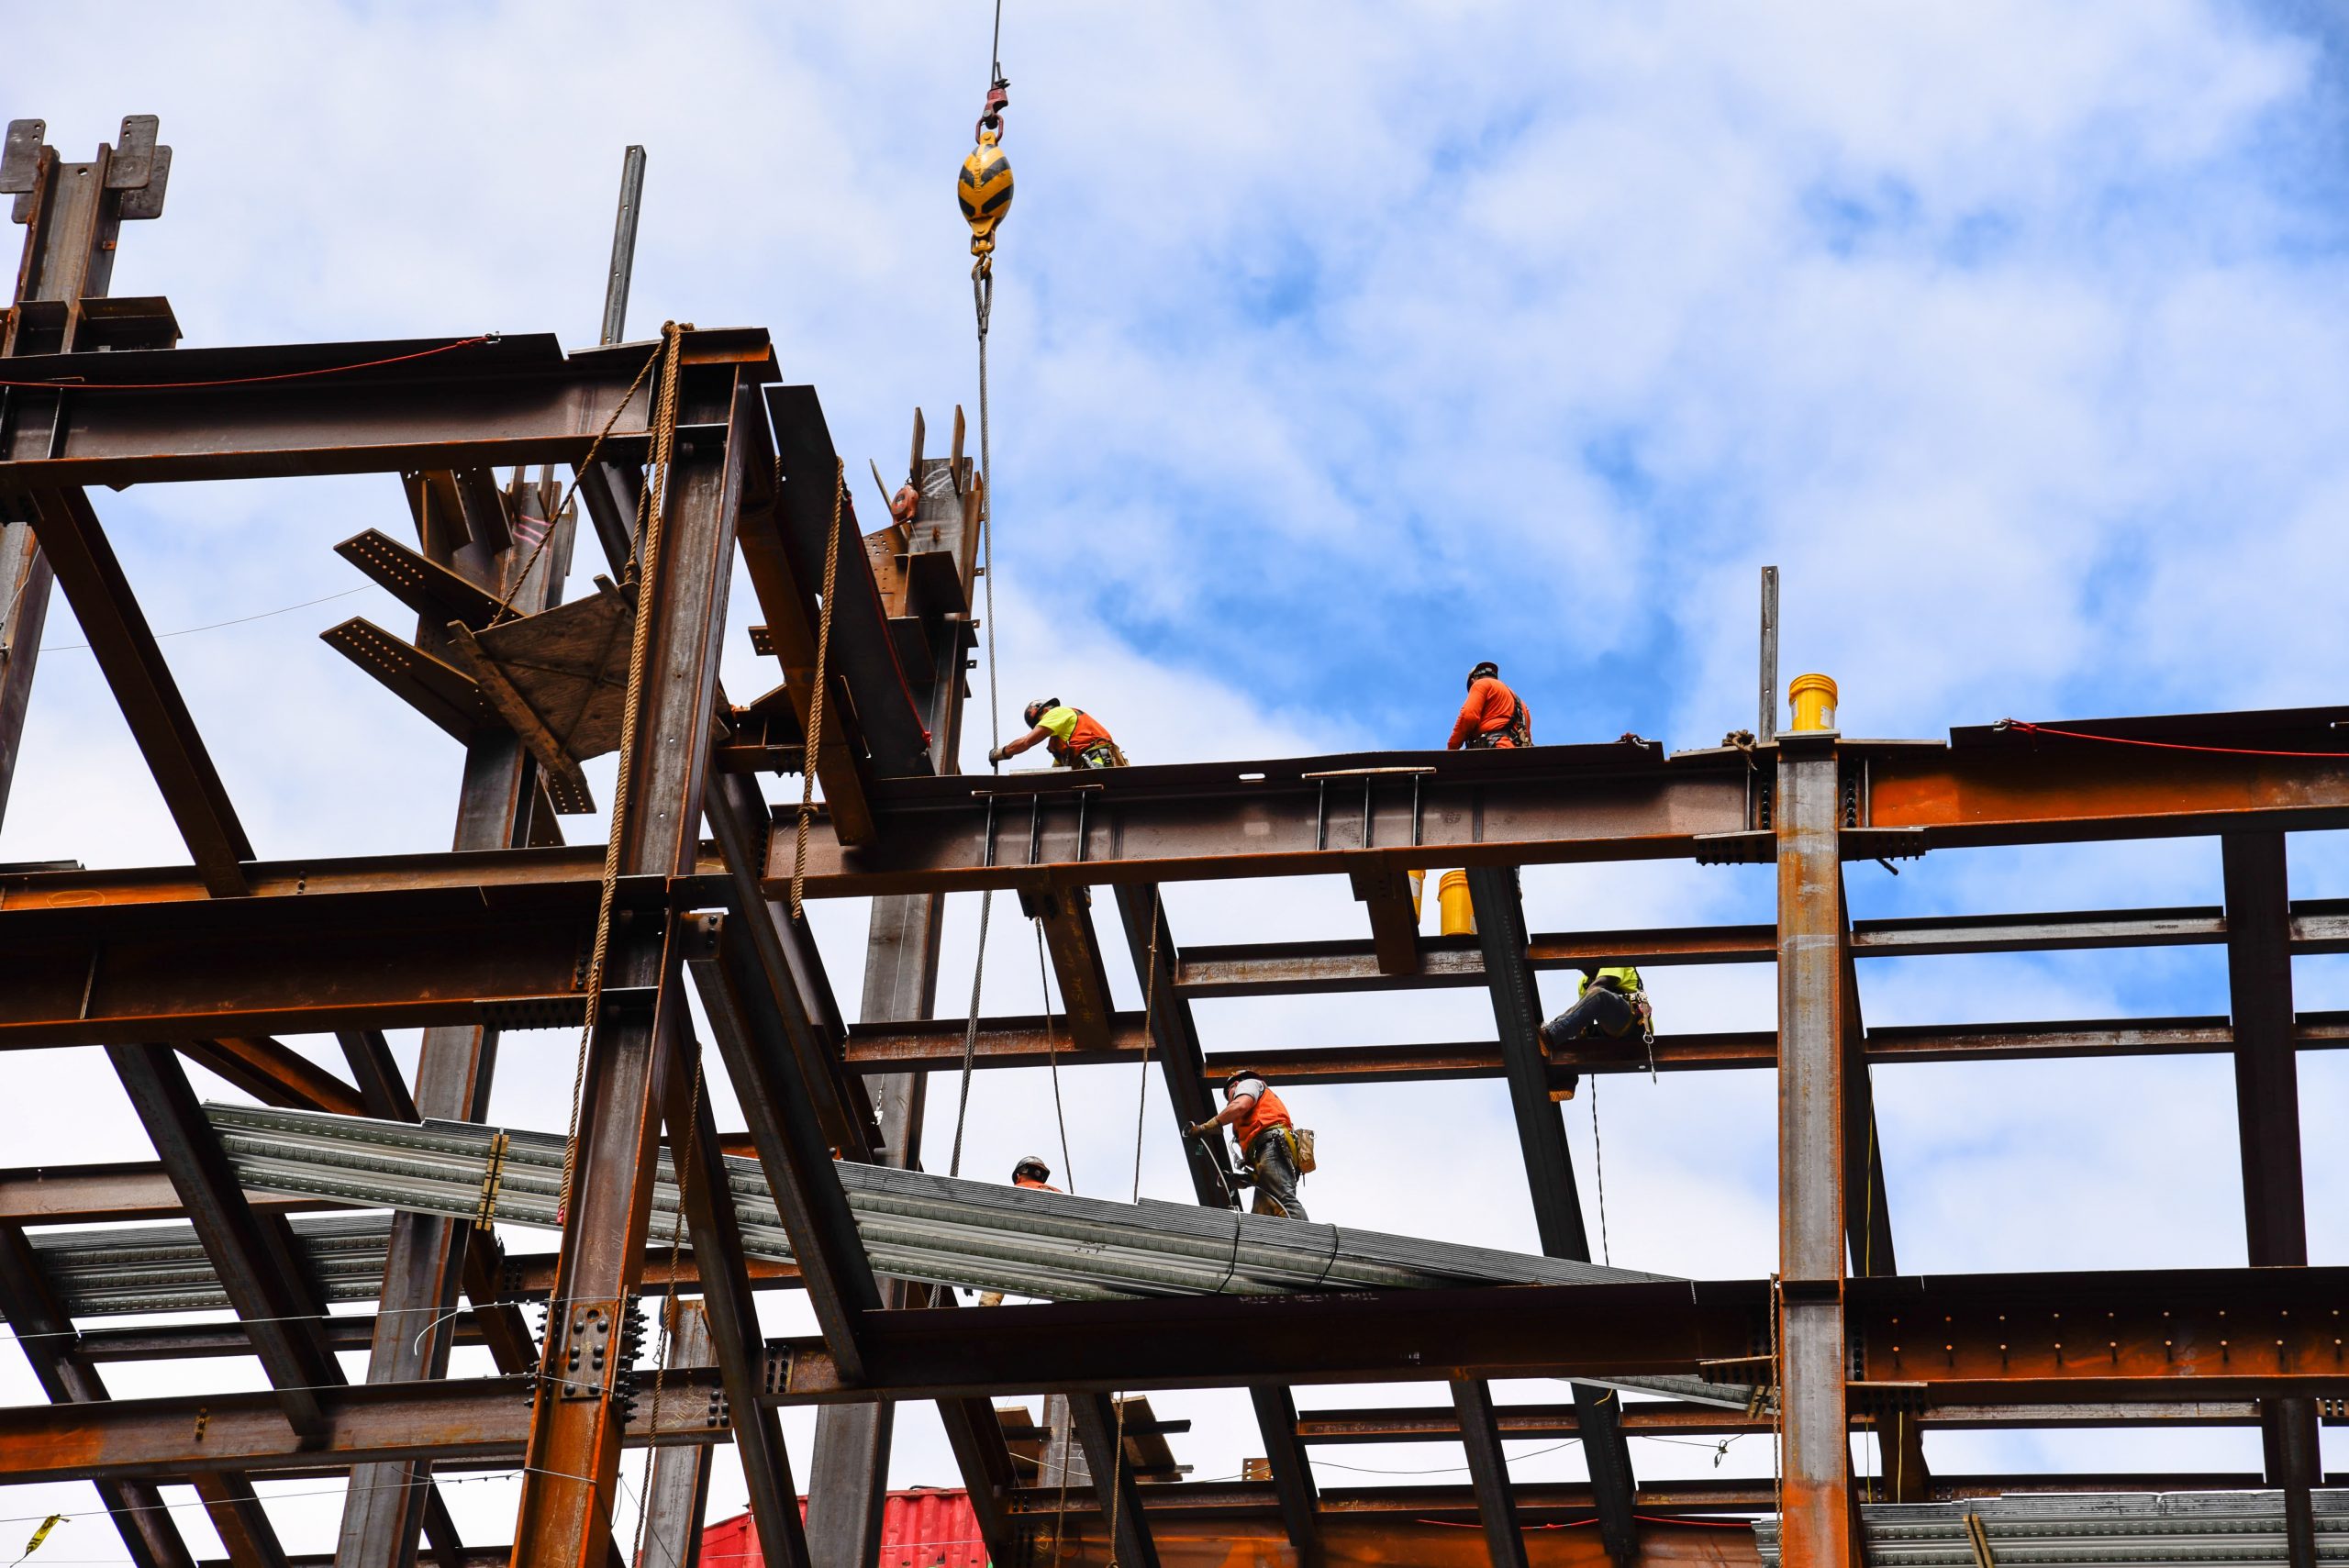 Construction workers on steel beams in construction site of skys